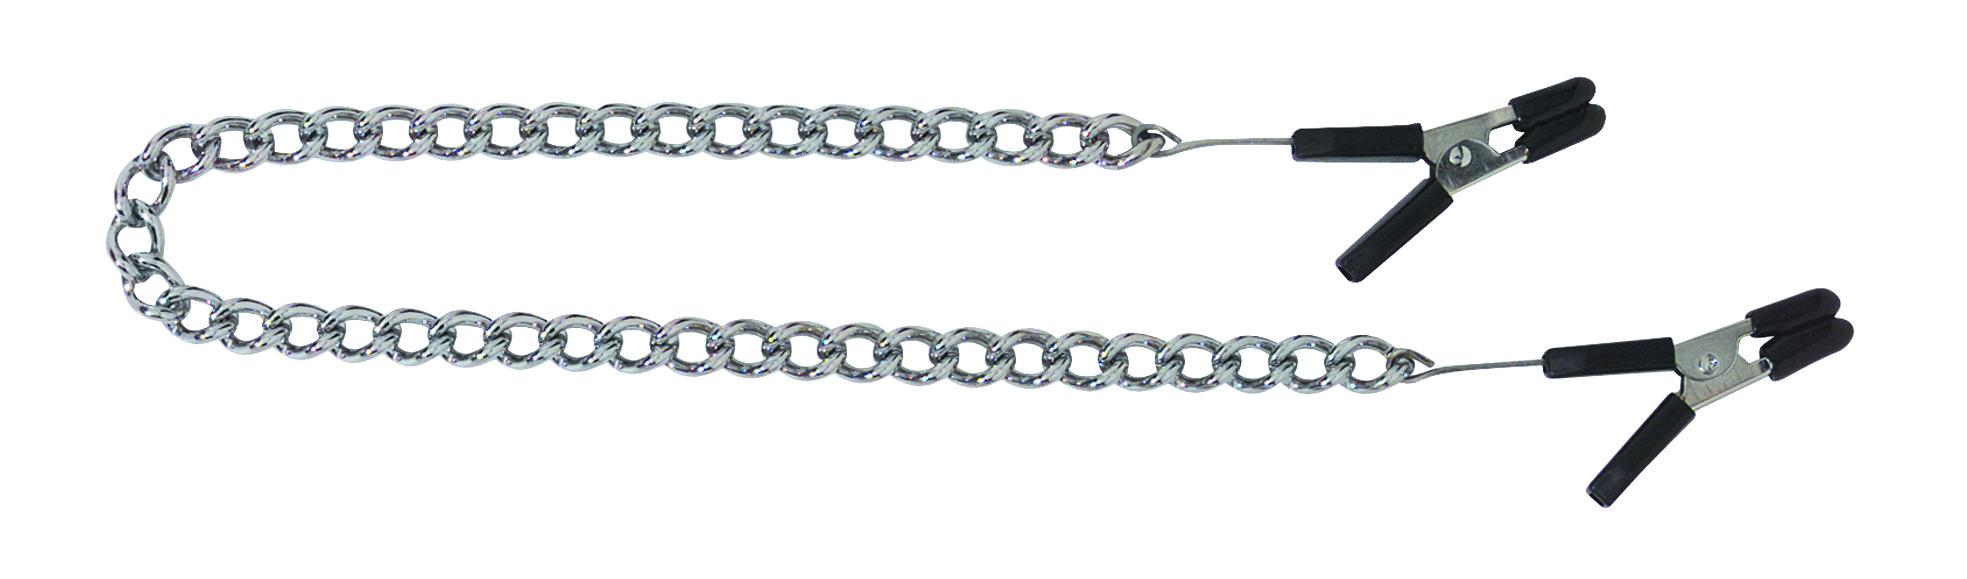 Endurance Jumper Cable Clamps - Link Chain